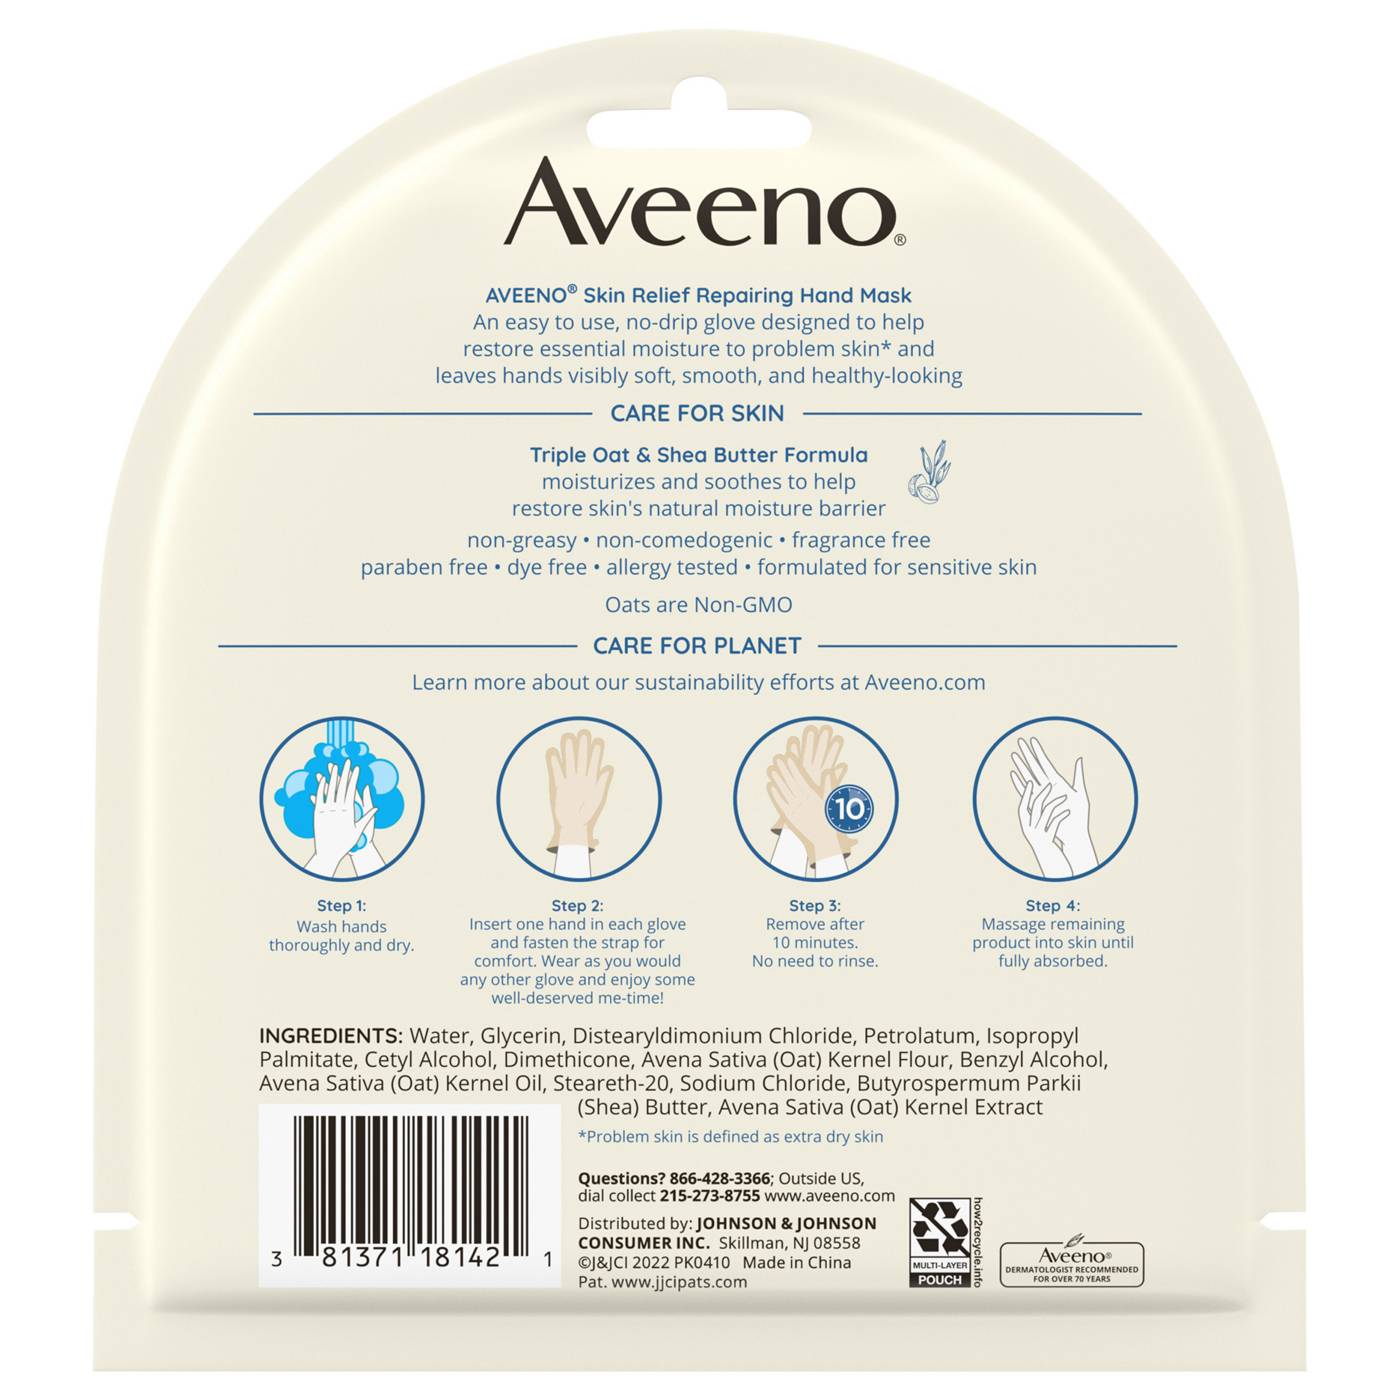 Aveeno Skin Relief Repairing Hand Mask 2 Single-Use Gloves; image 2 of 2